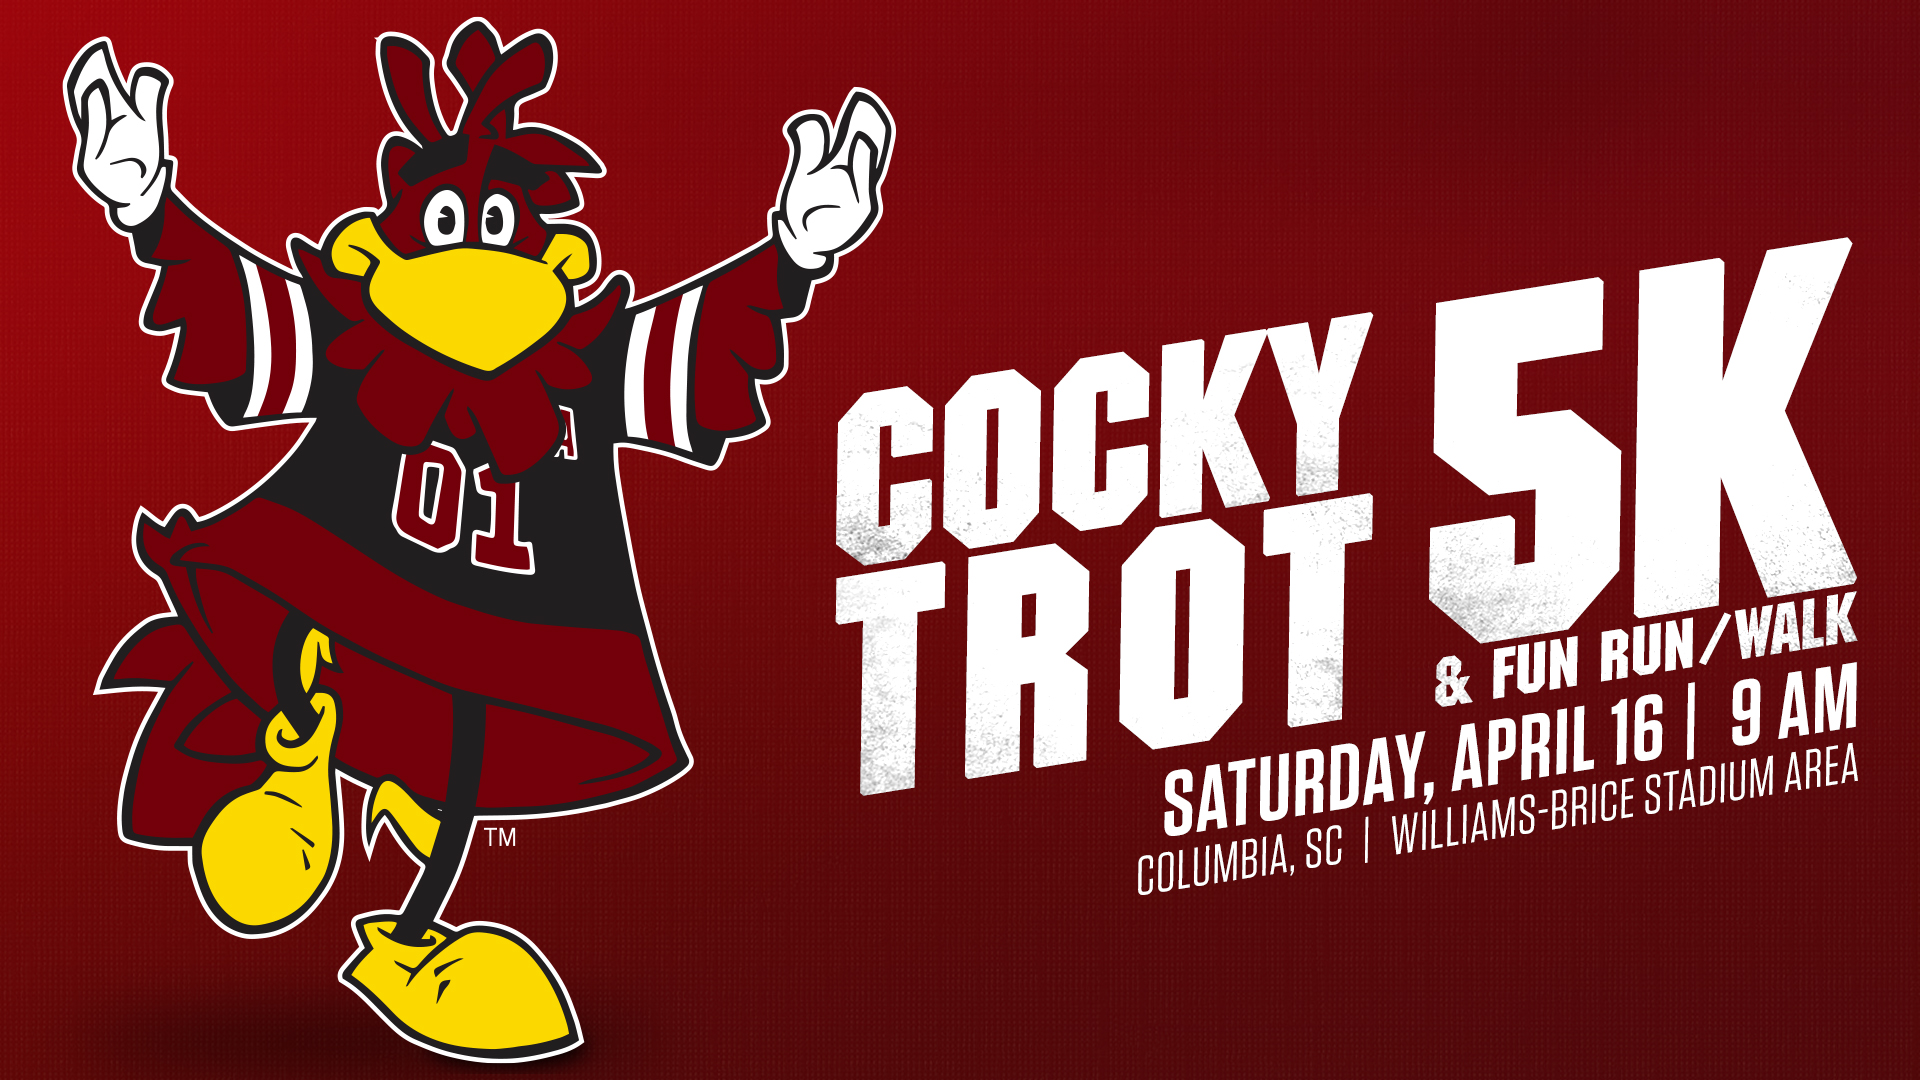 Details Announced for Cocky Trot 5K and Alumni Spring Game